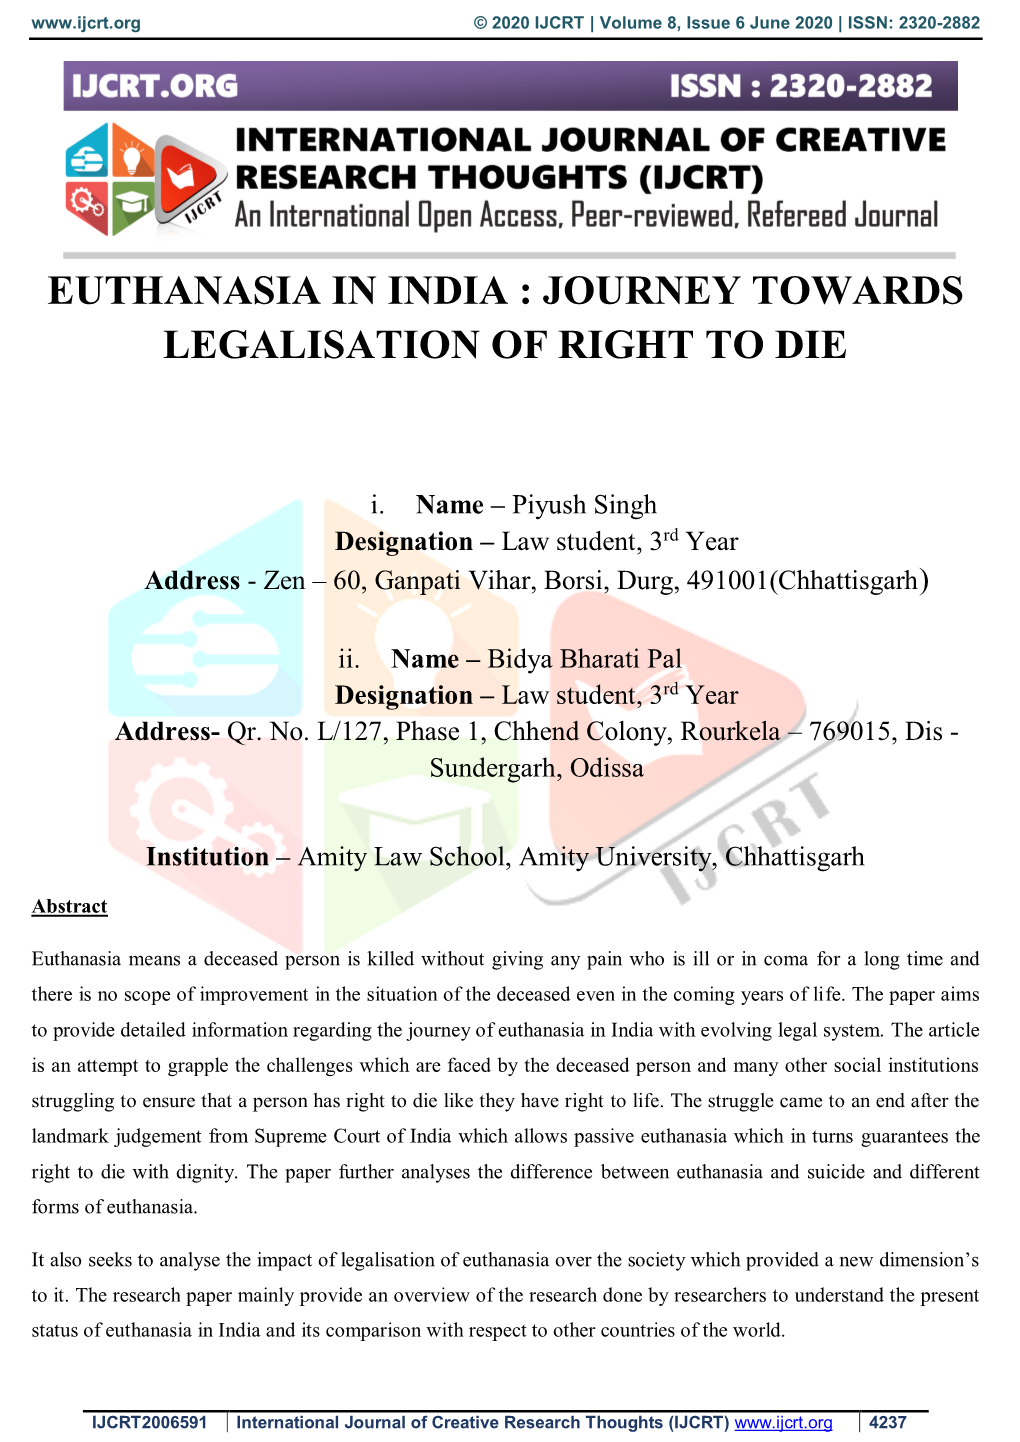 Euthanasia in India : Journey Towards Legalisation of Right to Die